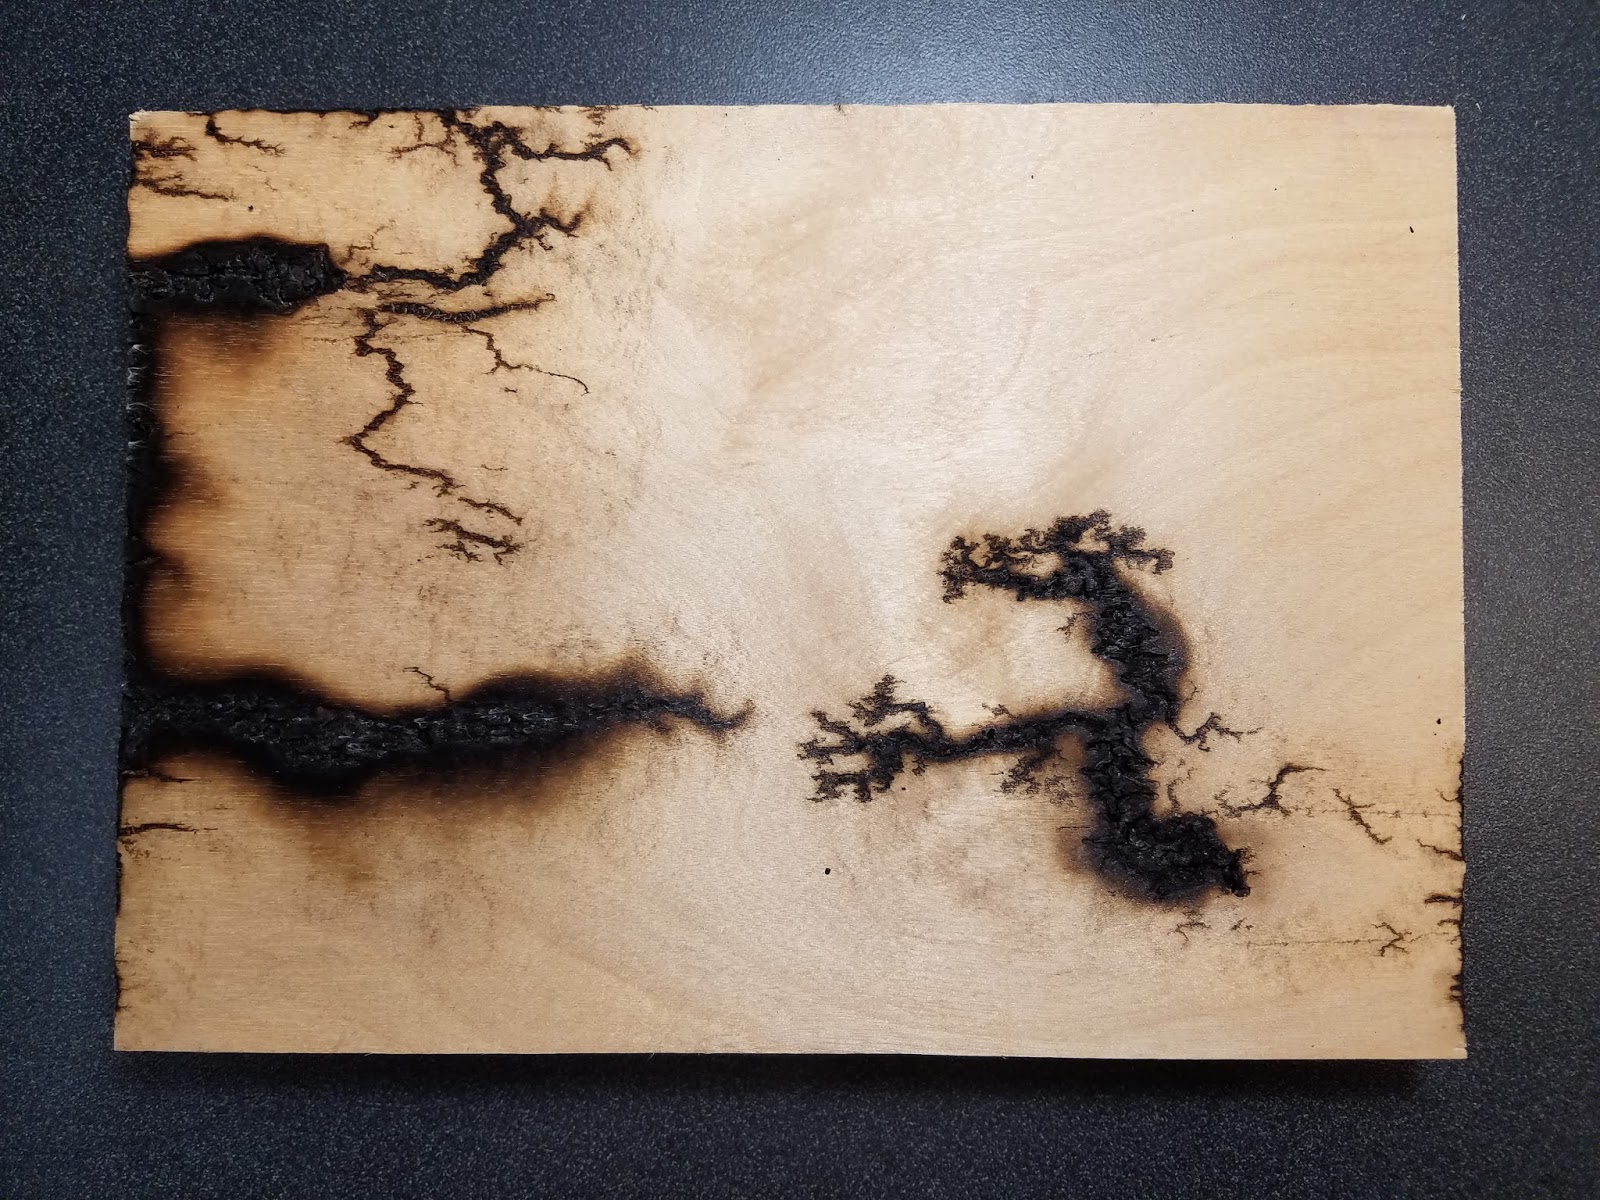 Mad Lab 5: Creating Lichtenberg Figures with Microwave Oven